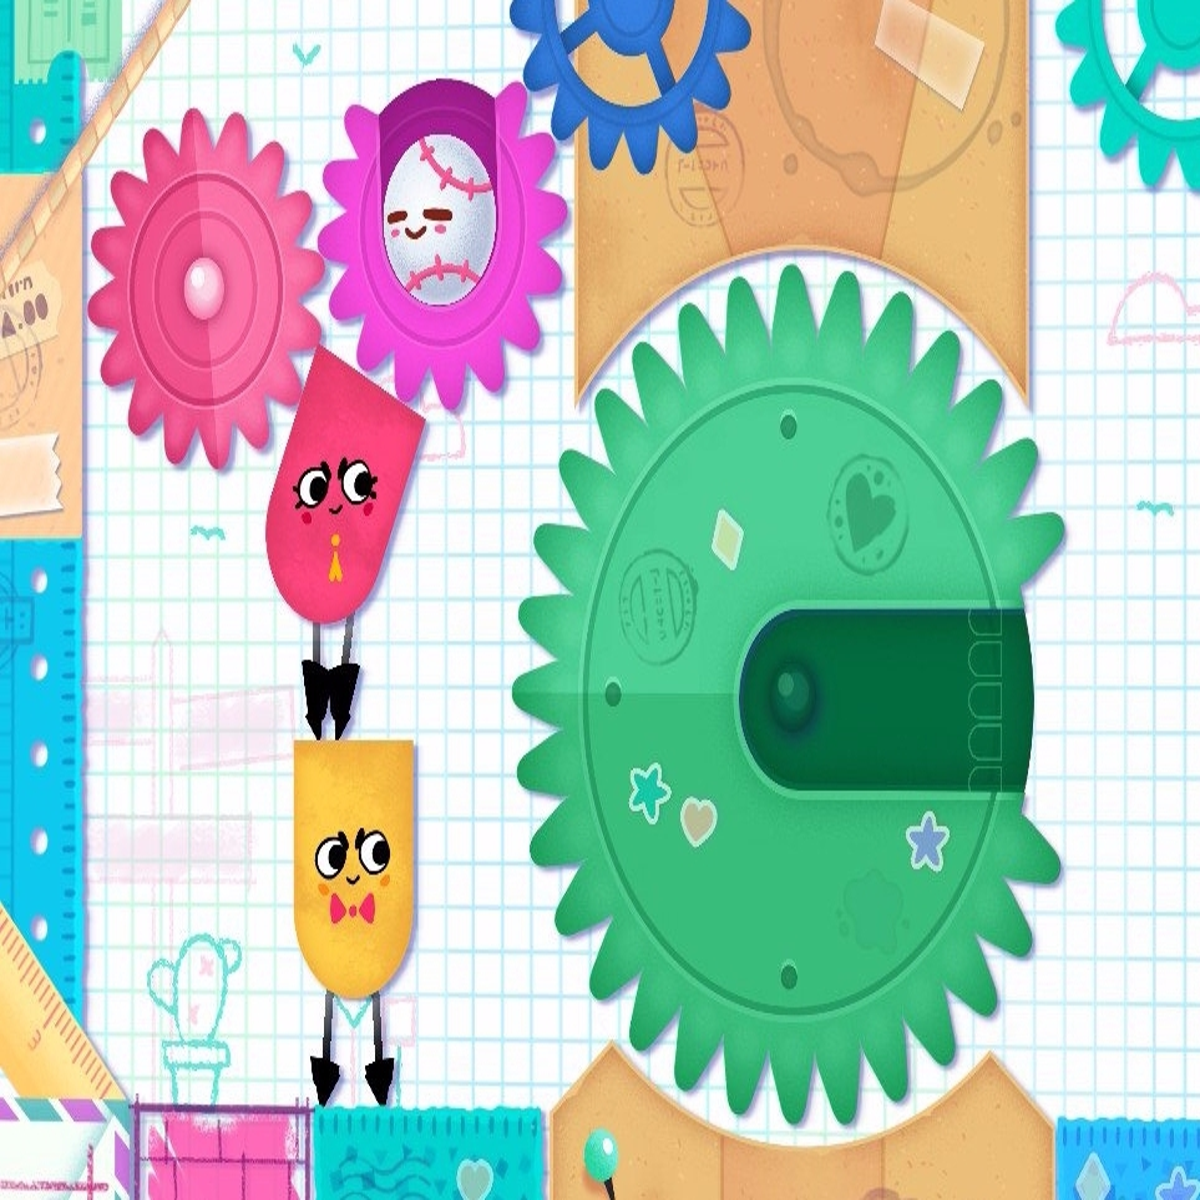 Snipperclips - IGN